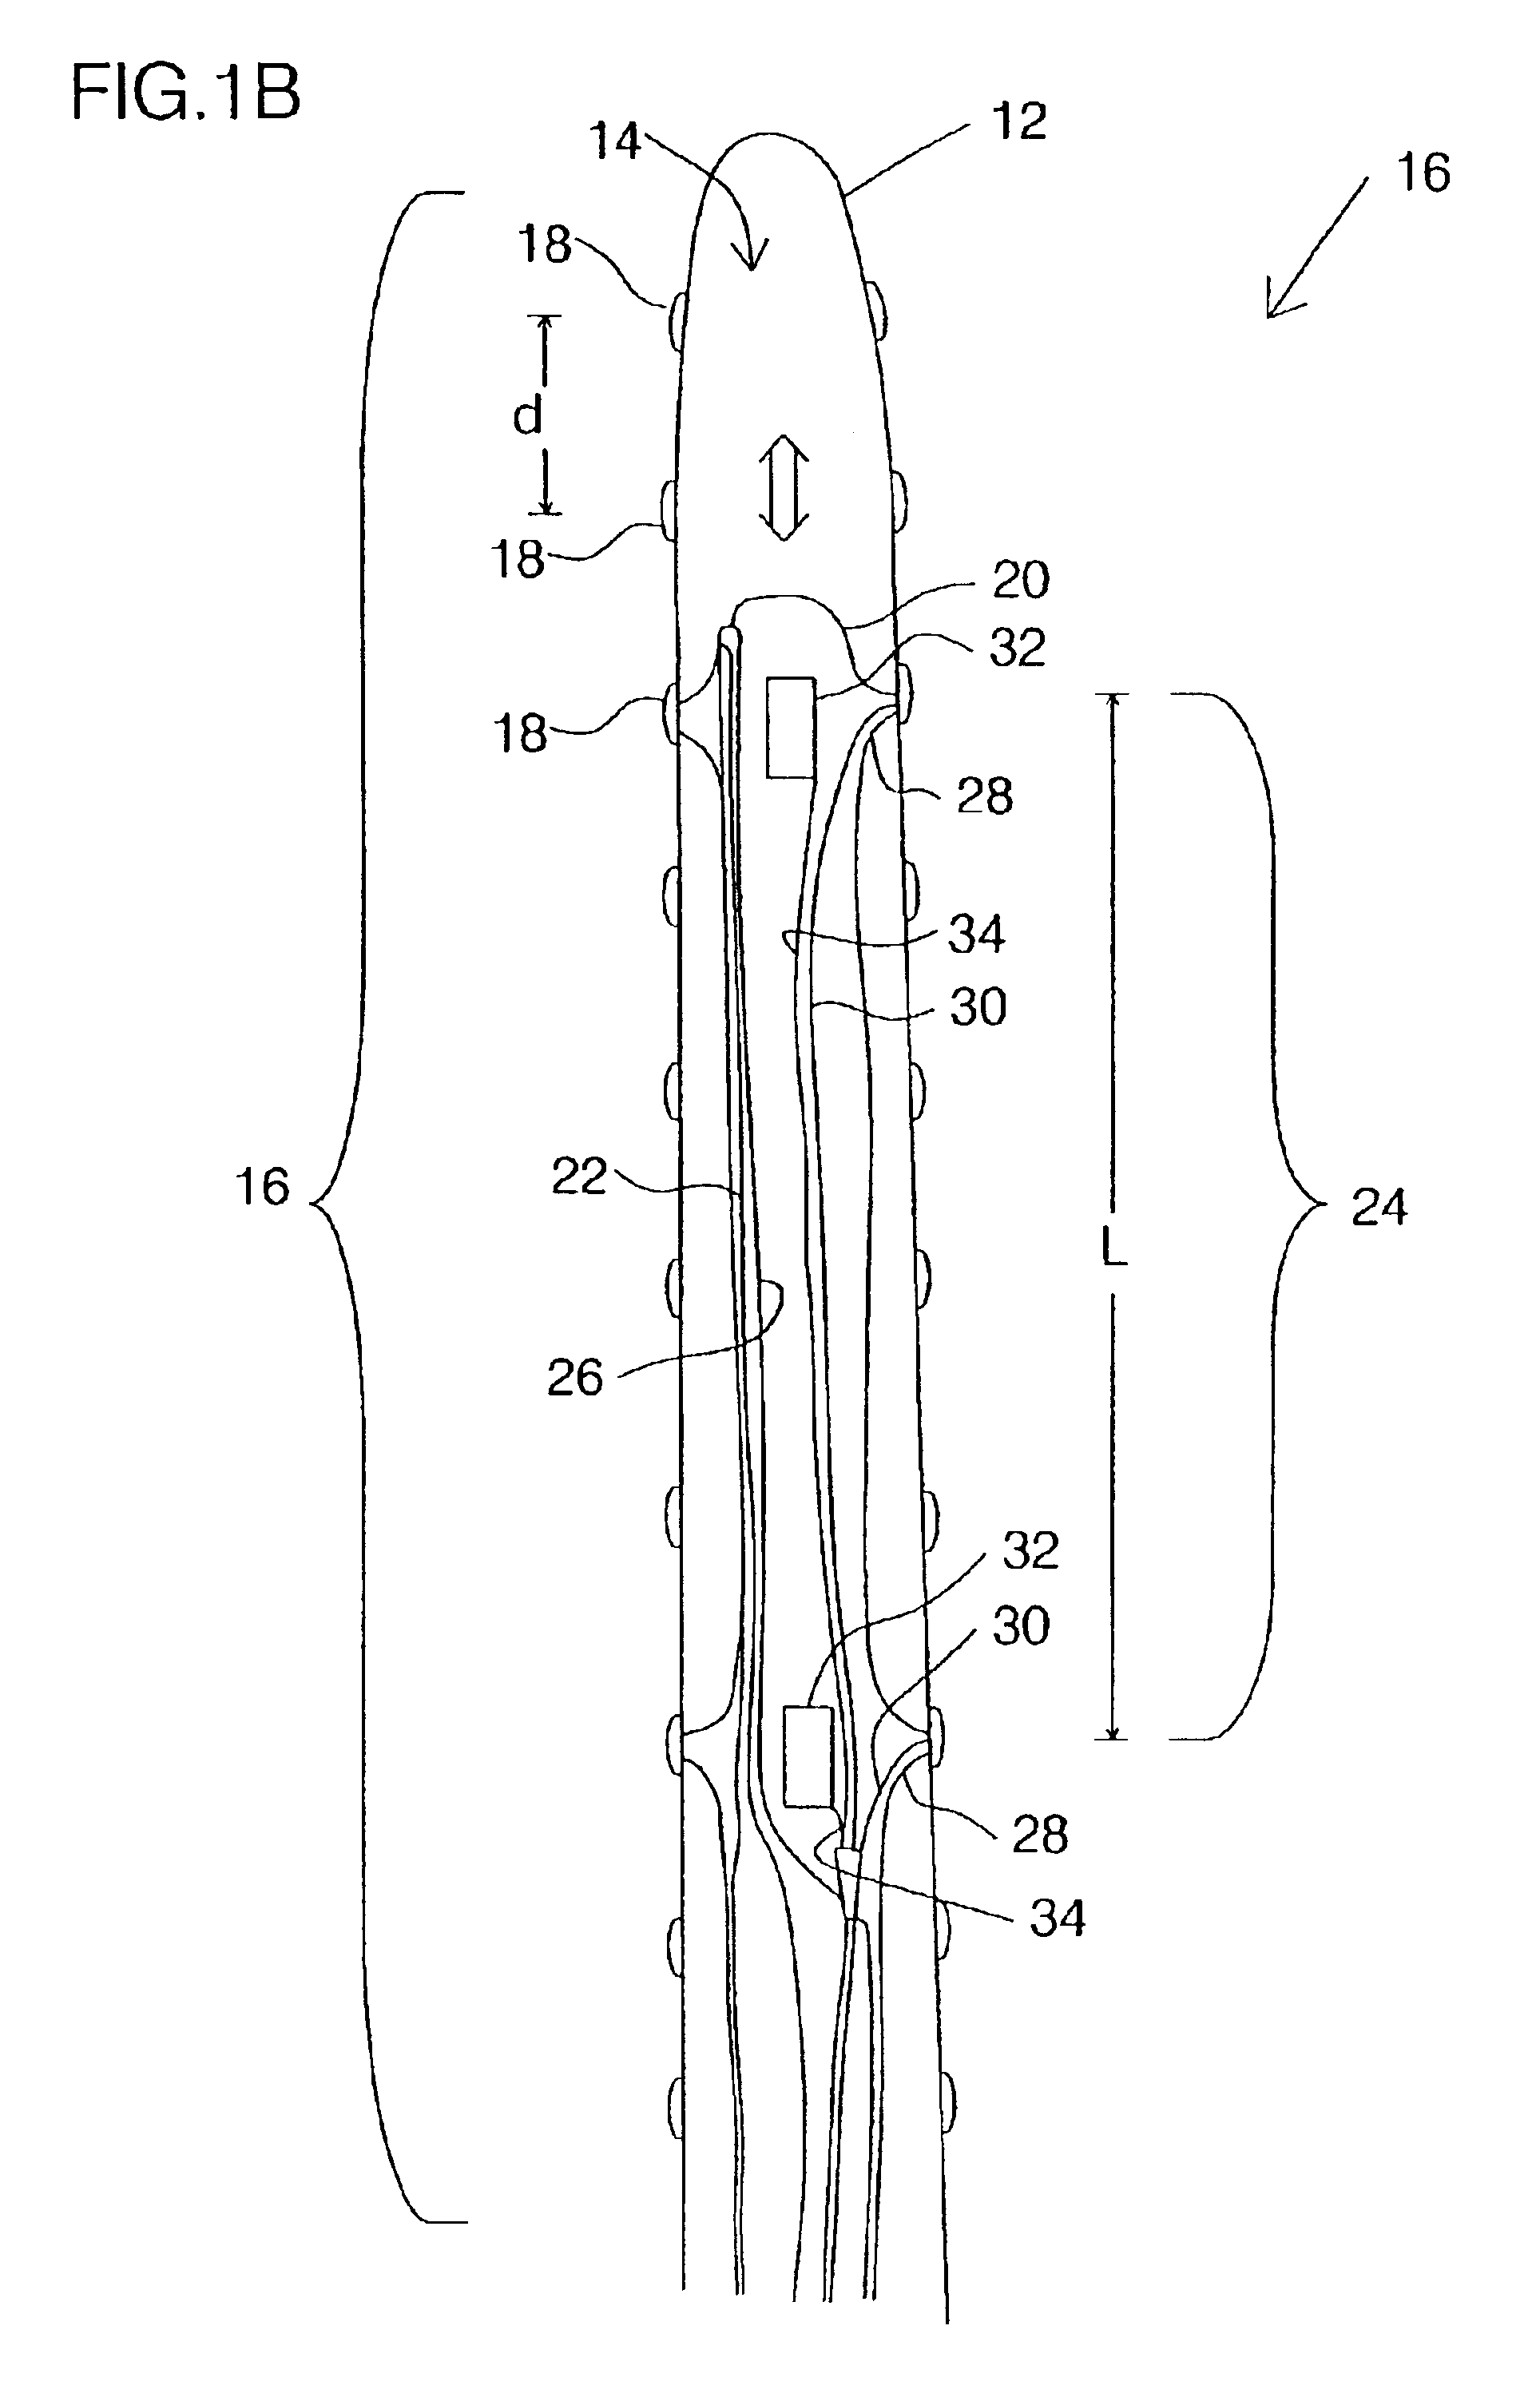 Multiple-electrode catheter assembly and method of operating such a catheter assembly